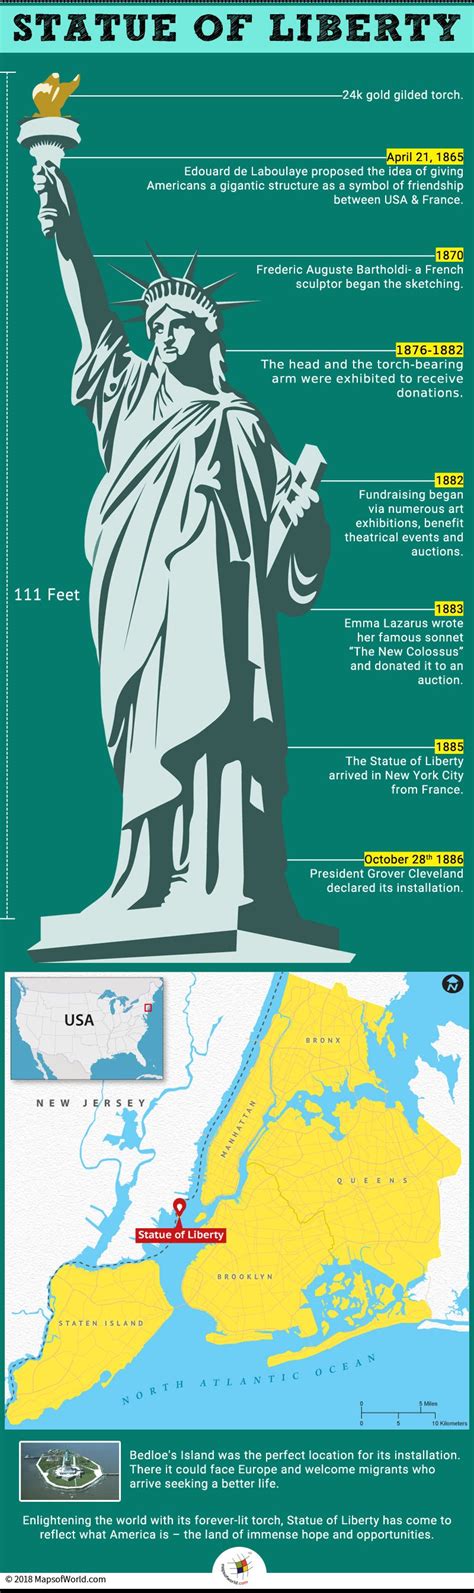 What Is The History Behind The Statue Of Liberty Answers